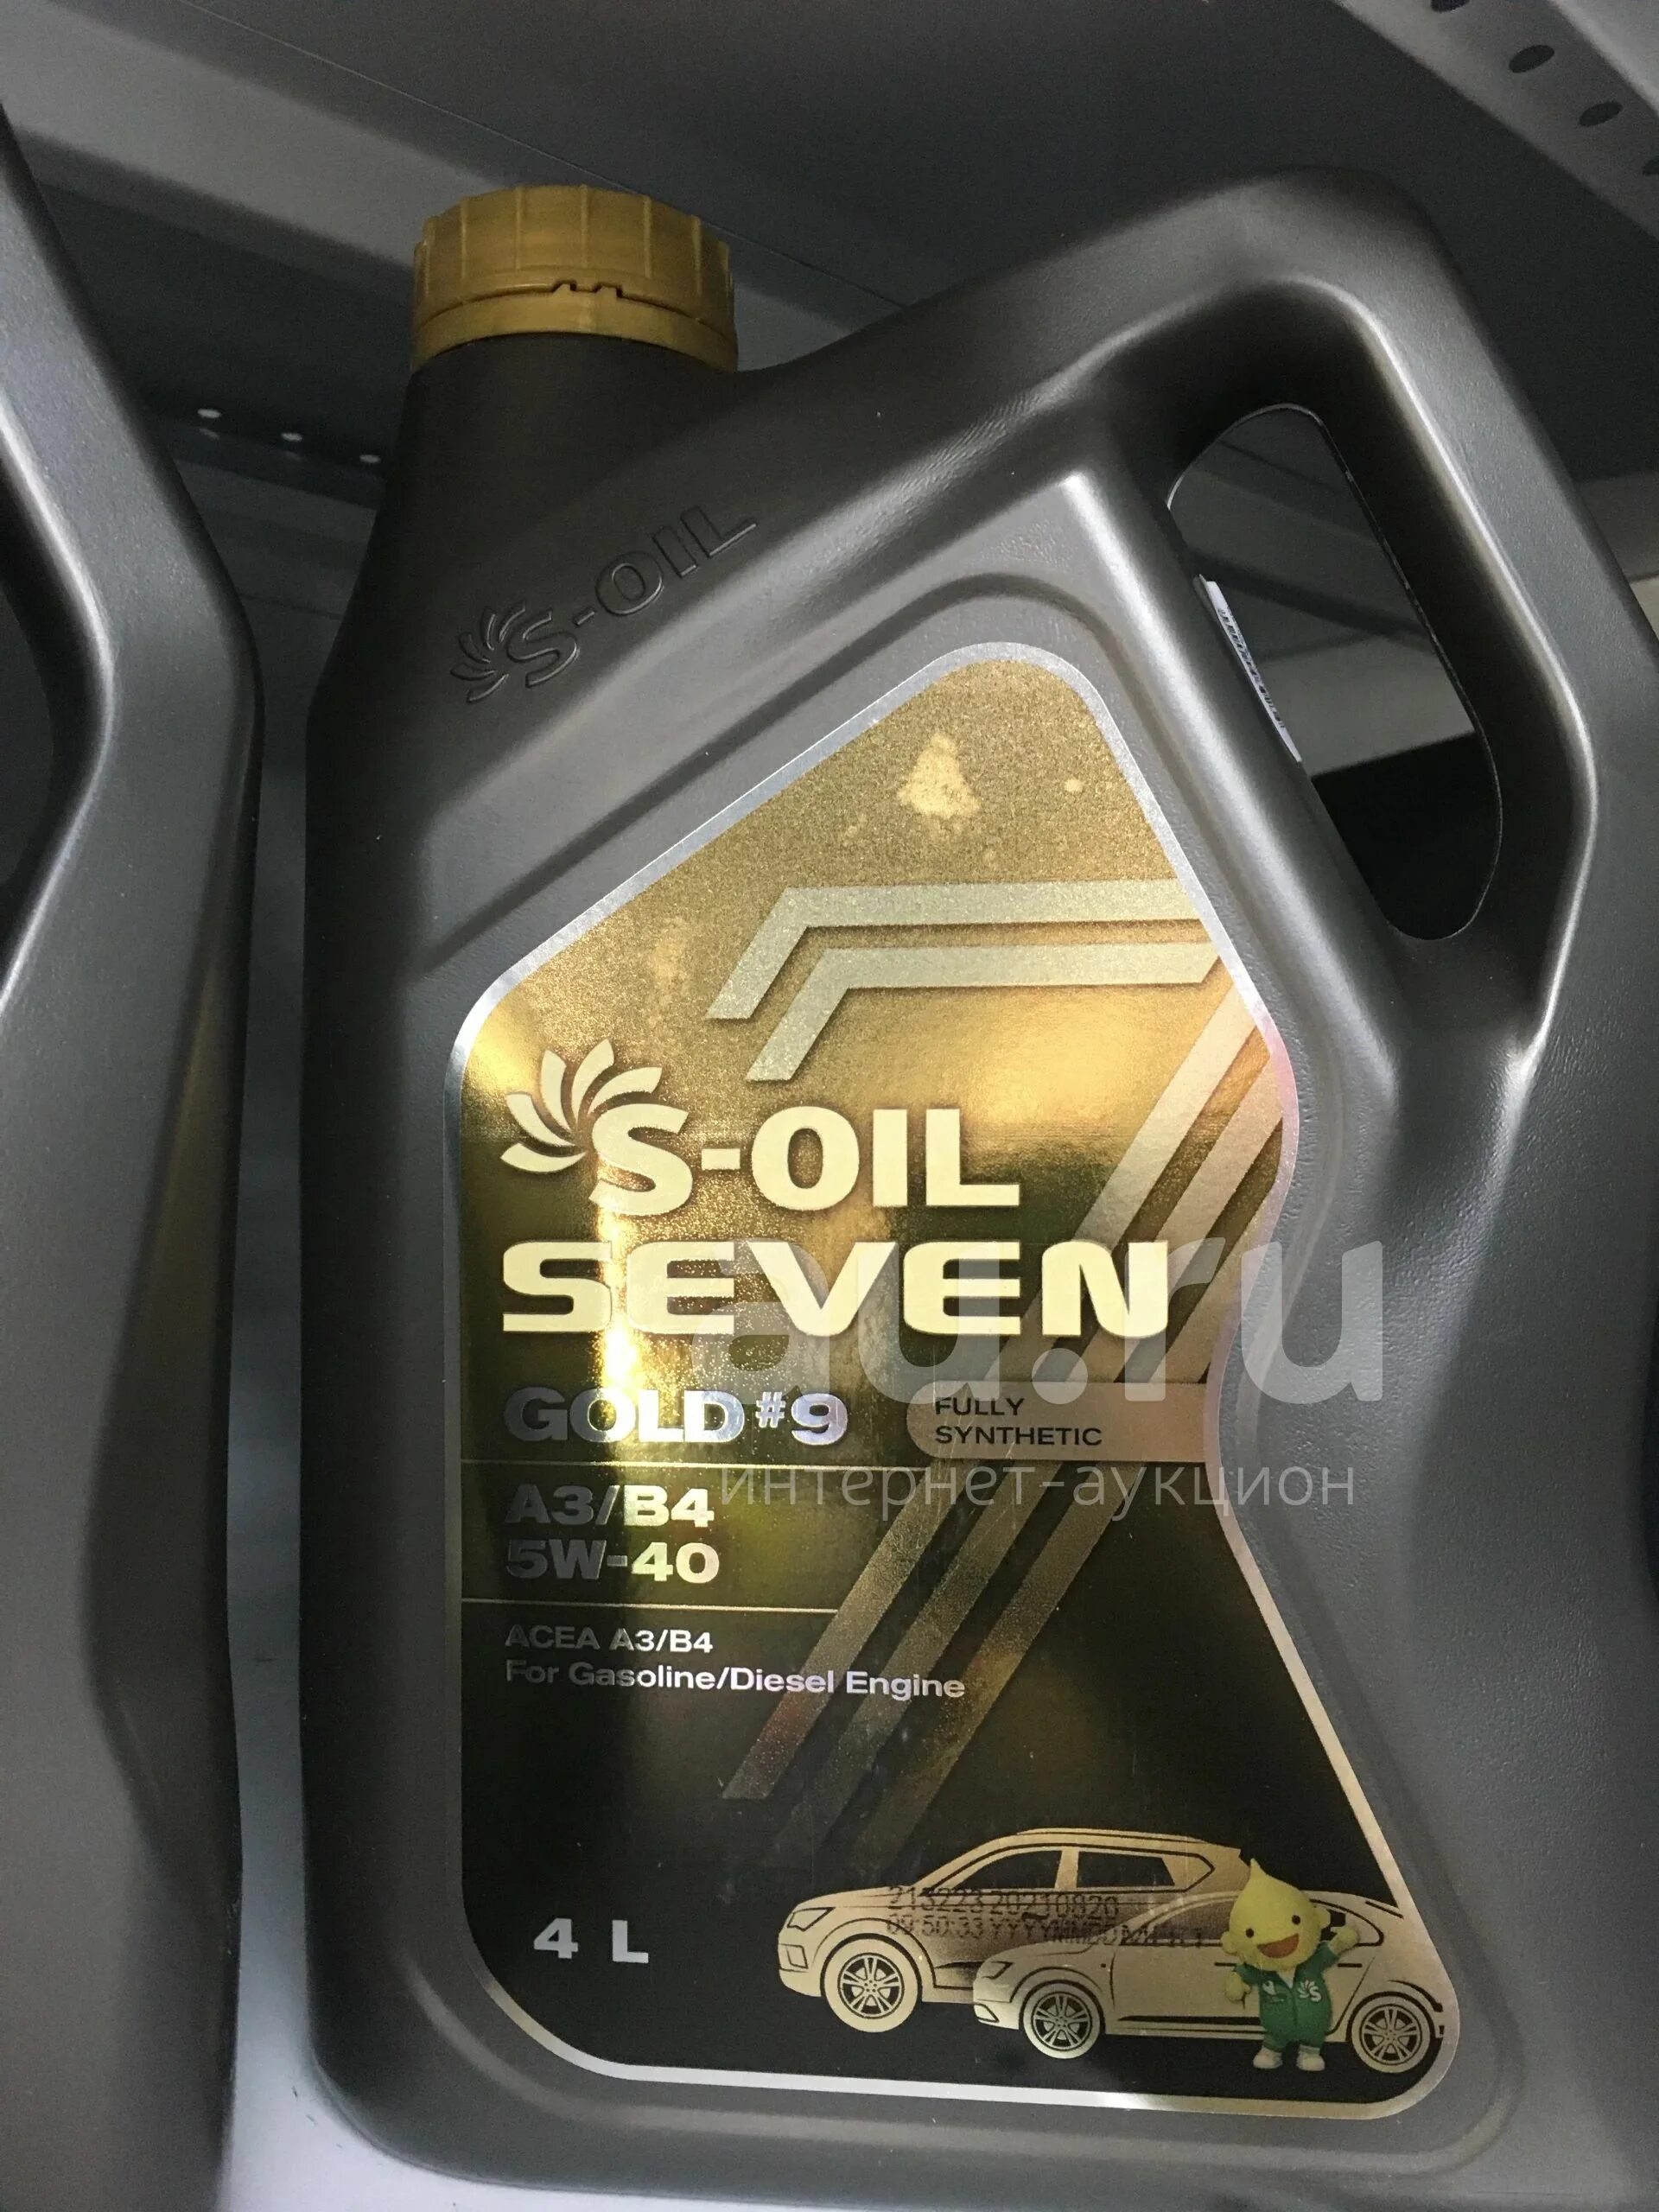 S-Oil Seven Gold #9 5w-30 a5/b5. S-Oil 7 Gold #9 a3/b4 5w40. S-Oil 7 Gold #9 c5 0w20. S-Oil Seven gold9 a3/b4 SN 10w40 синтетика (20л.). Моторное масло gold 5w40